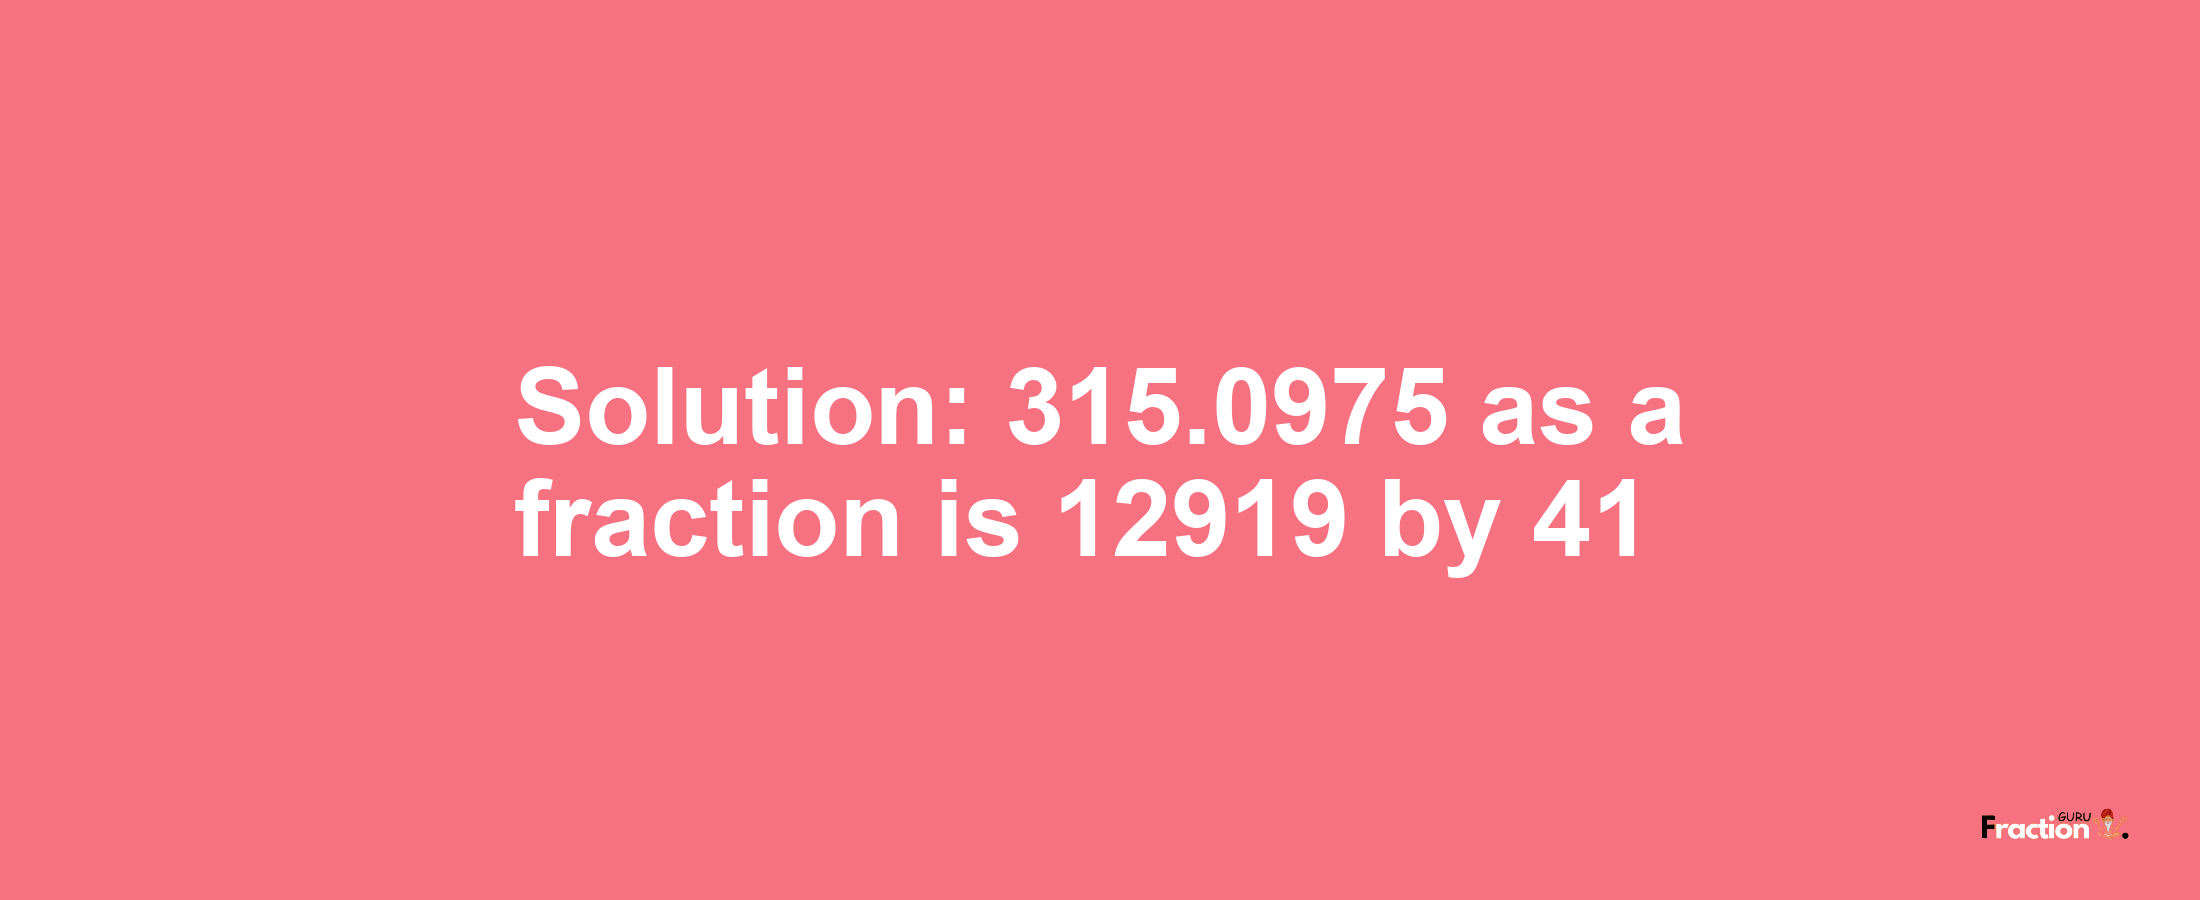 Solution:315.0975 as a fraction is 12919/41